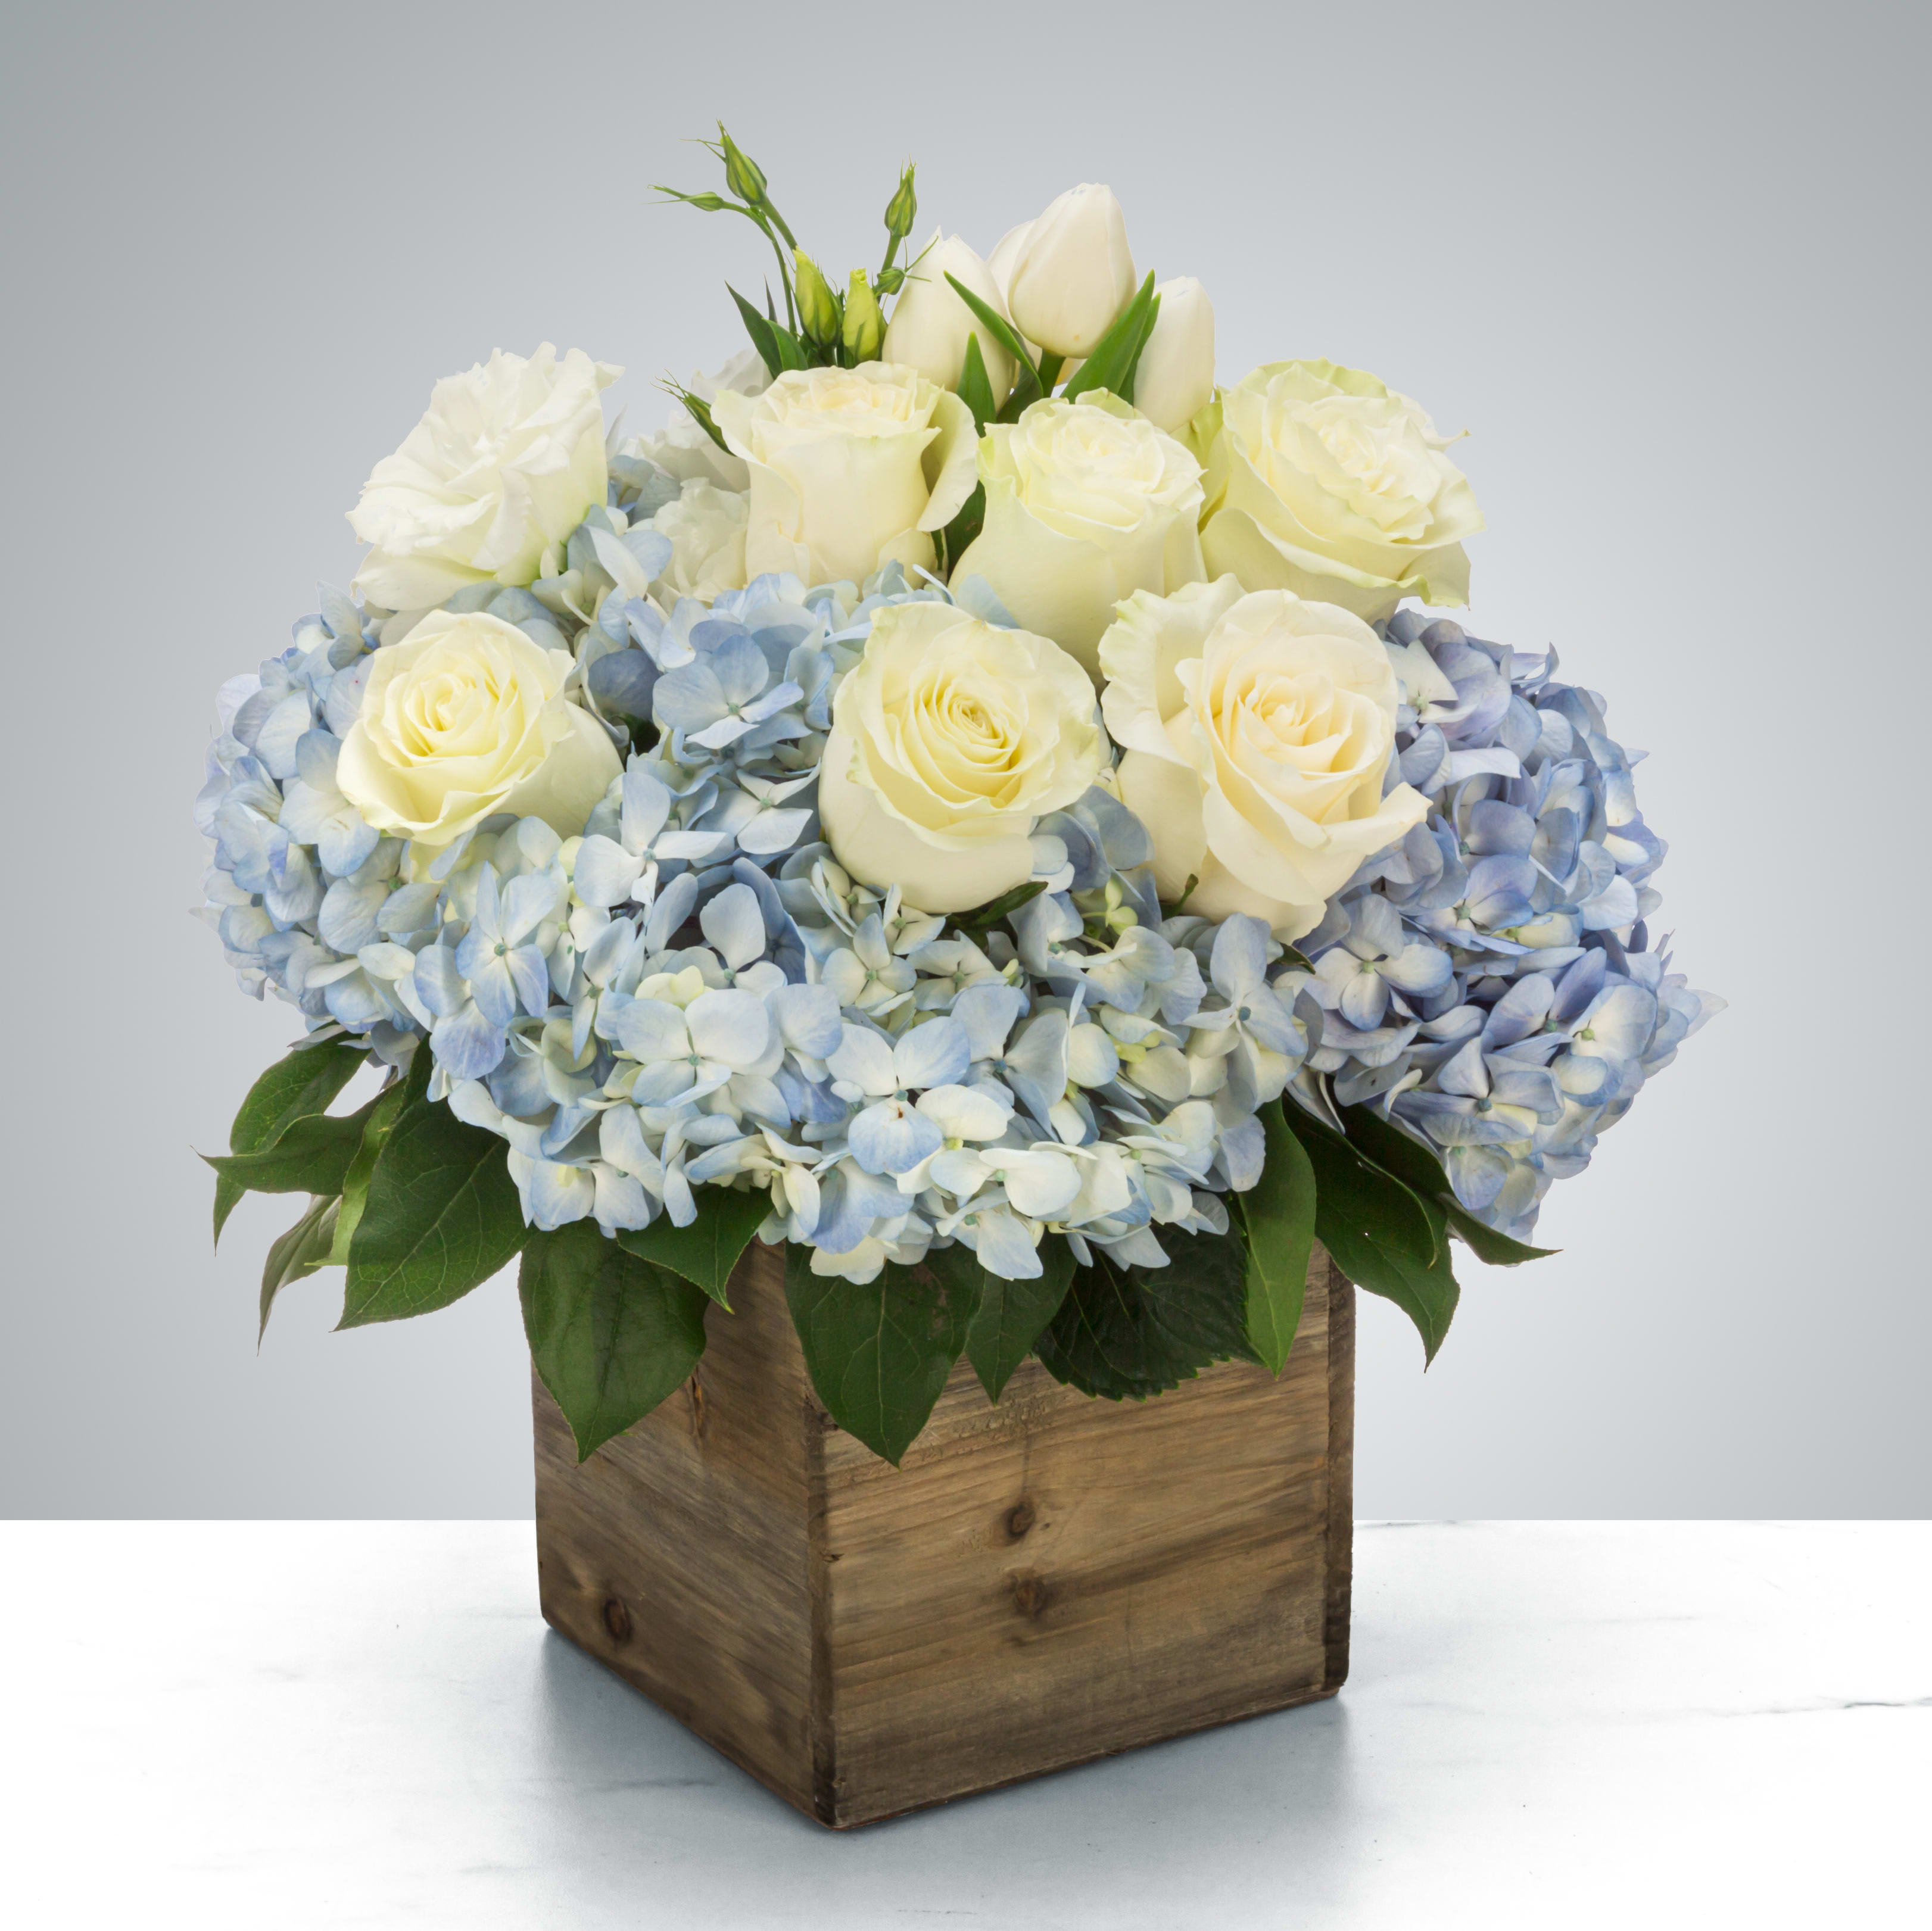 The New Yorker - Send something to let them know you care. Featuring blue hydrangea, white tulips, and white roses.